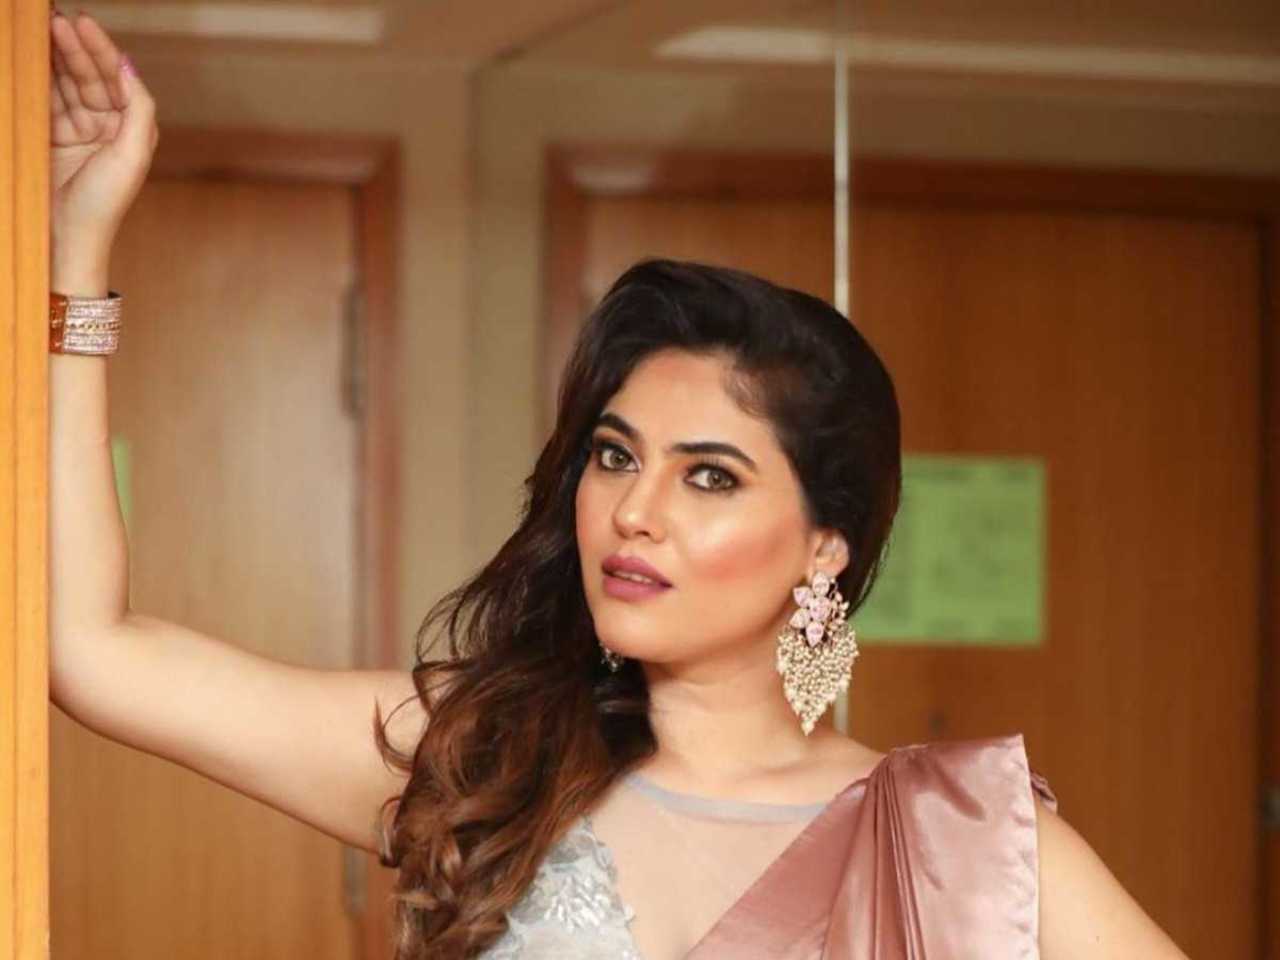 Bigbos Amty Sex - Bigg Boss Sherin hits out at troll who called her aunty | Tamil Movie News  - Times of India